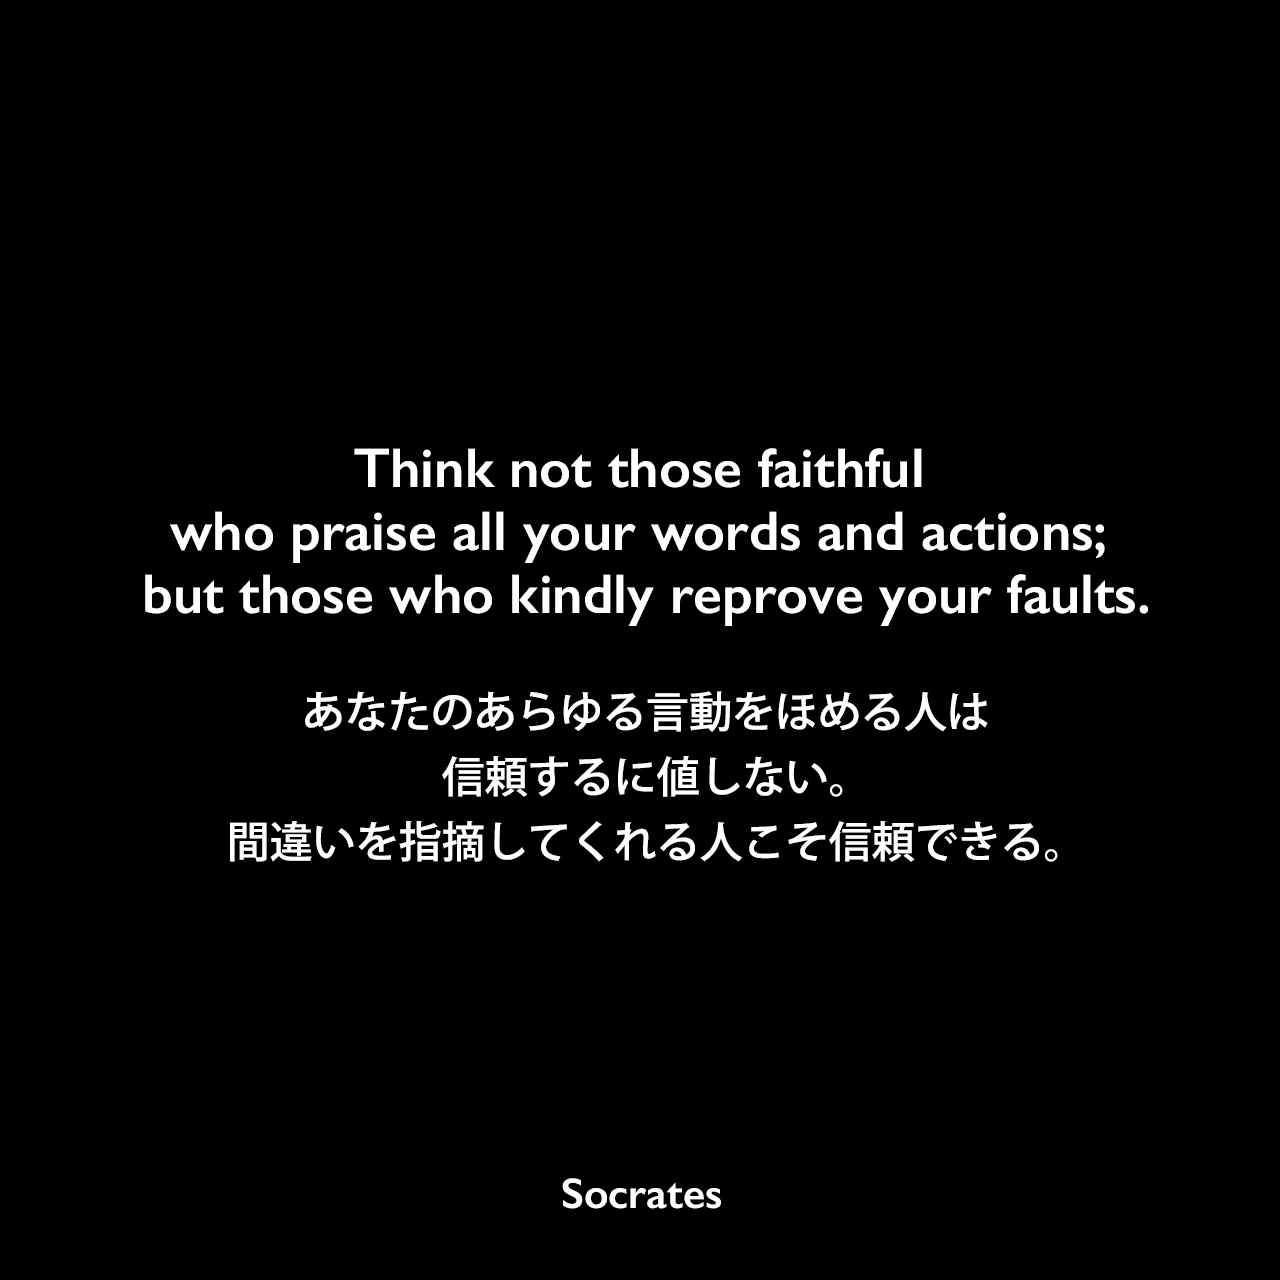 Think not those faithful who praise all your words and actions; but those who kindly reprove your faults.あなたのあらゆる言動をほめる人は信頼するに値しない。間違いを指摘してくれる人こそ信頼できる。Socrates